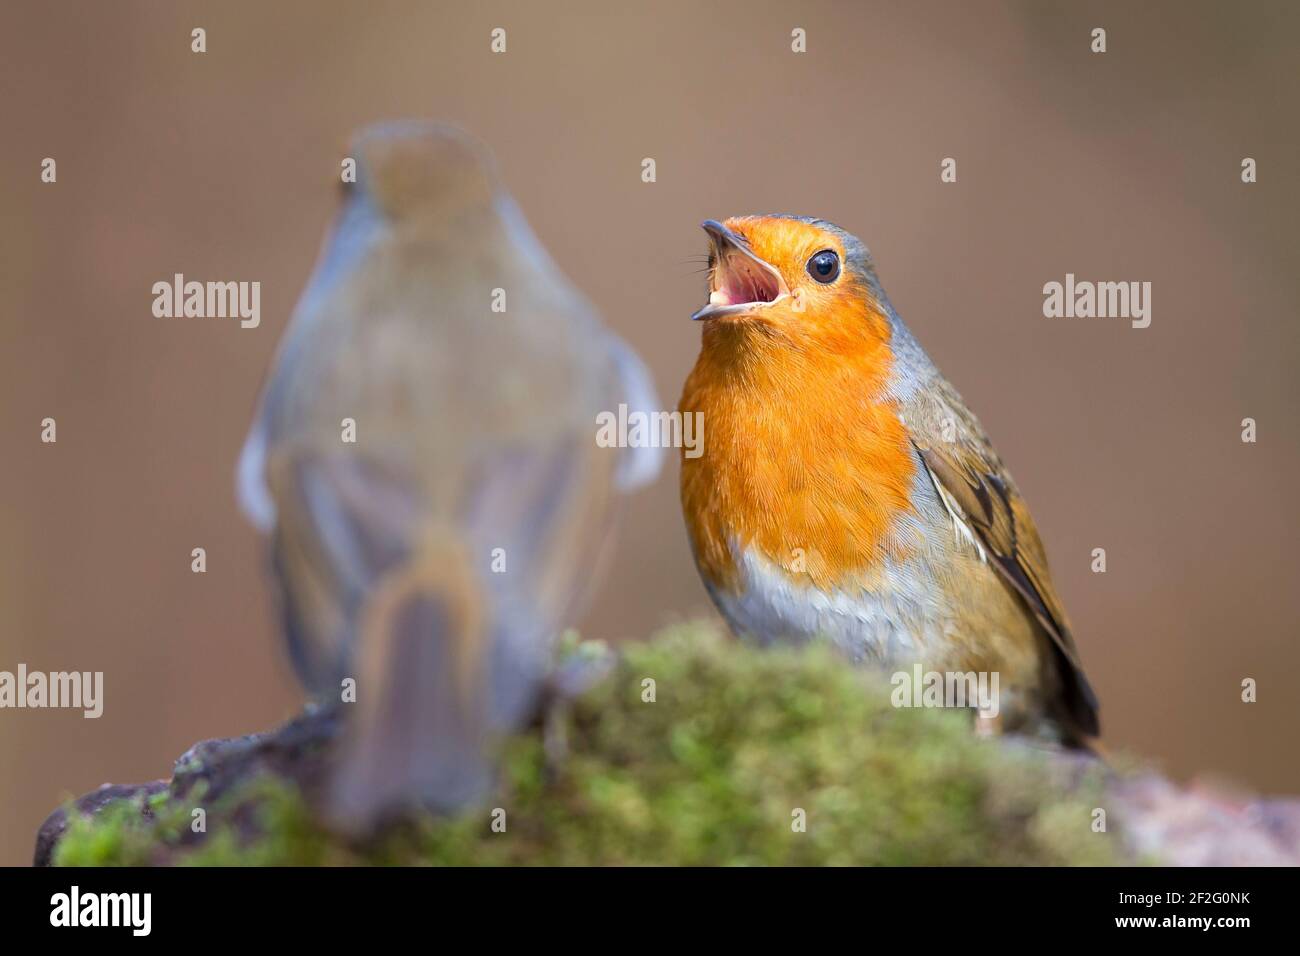 Front close up of a wild, UK robin bird (Erithacus rubecula) with beak wide open calling for food to another robin. Stock Photo